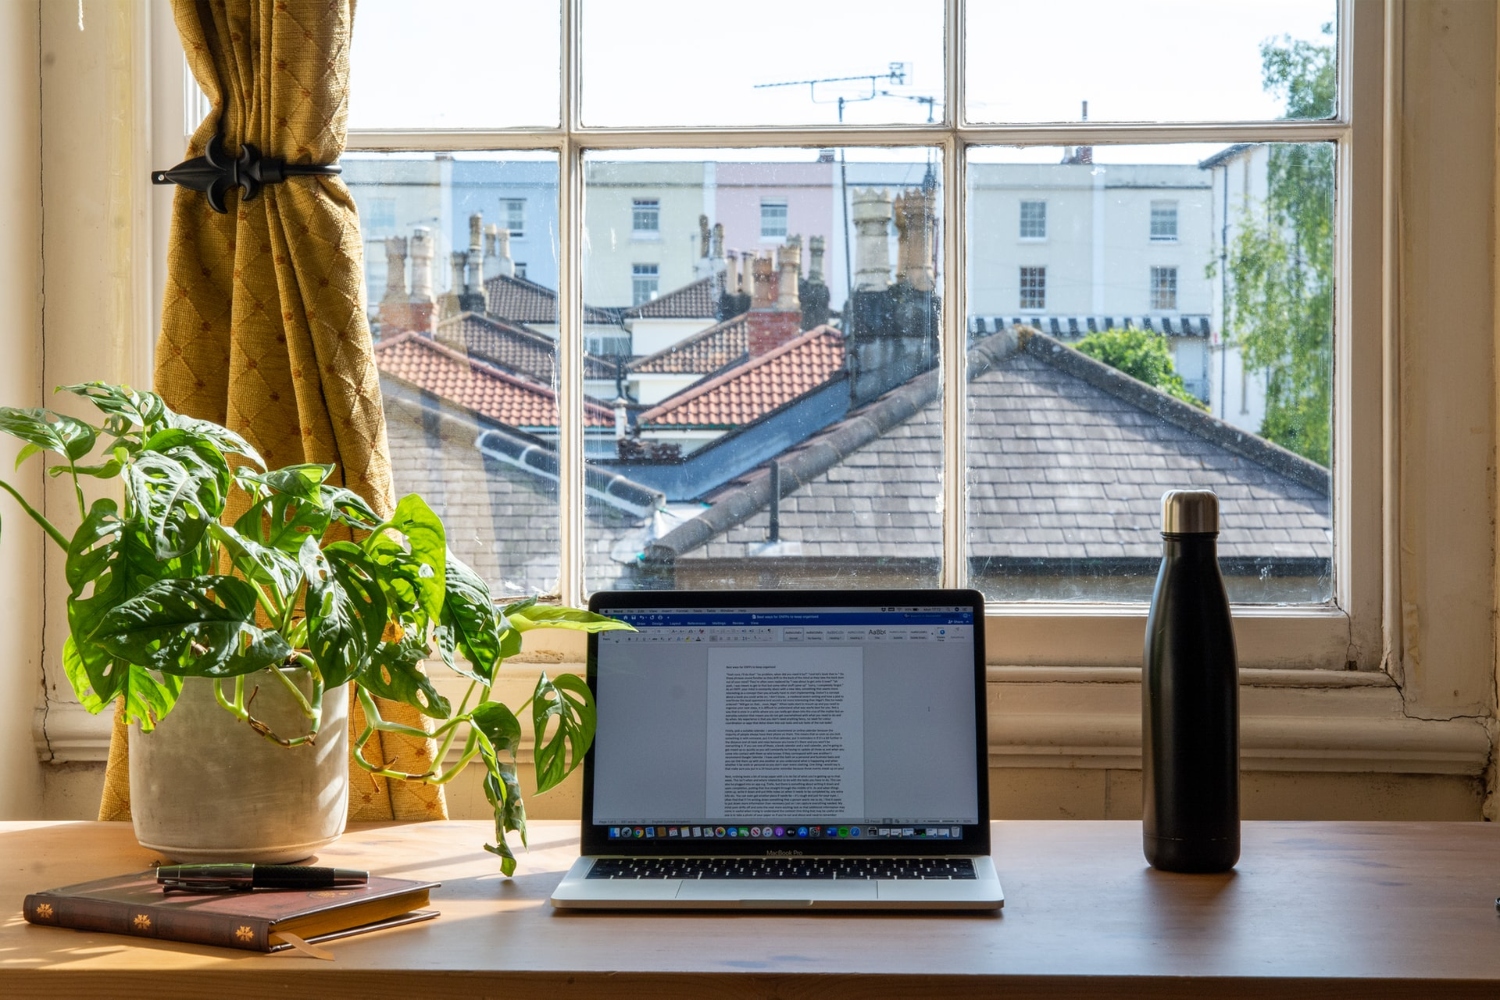 Turns out, you can’t just start working from home and expect that the initial excitement of bidding your coworkers adieu won’t wear off in due time. Here are some of the ways I’ve found to keep those good times goin’.